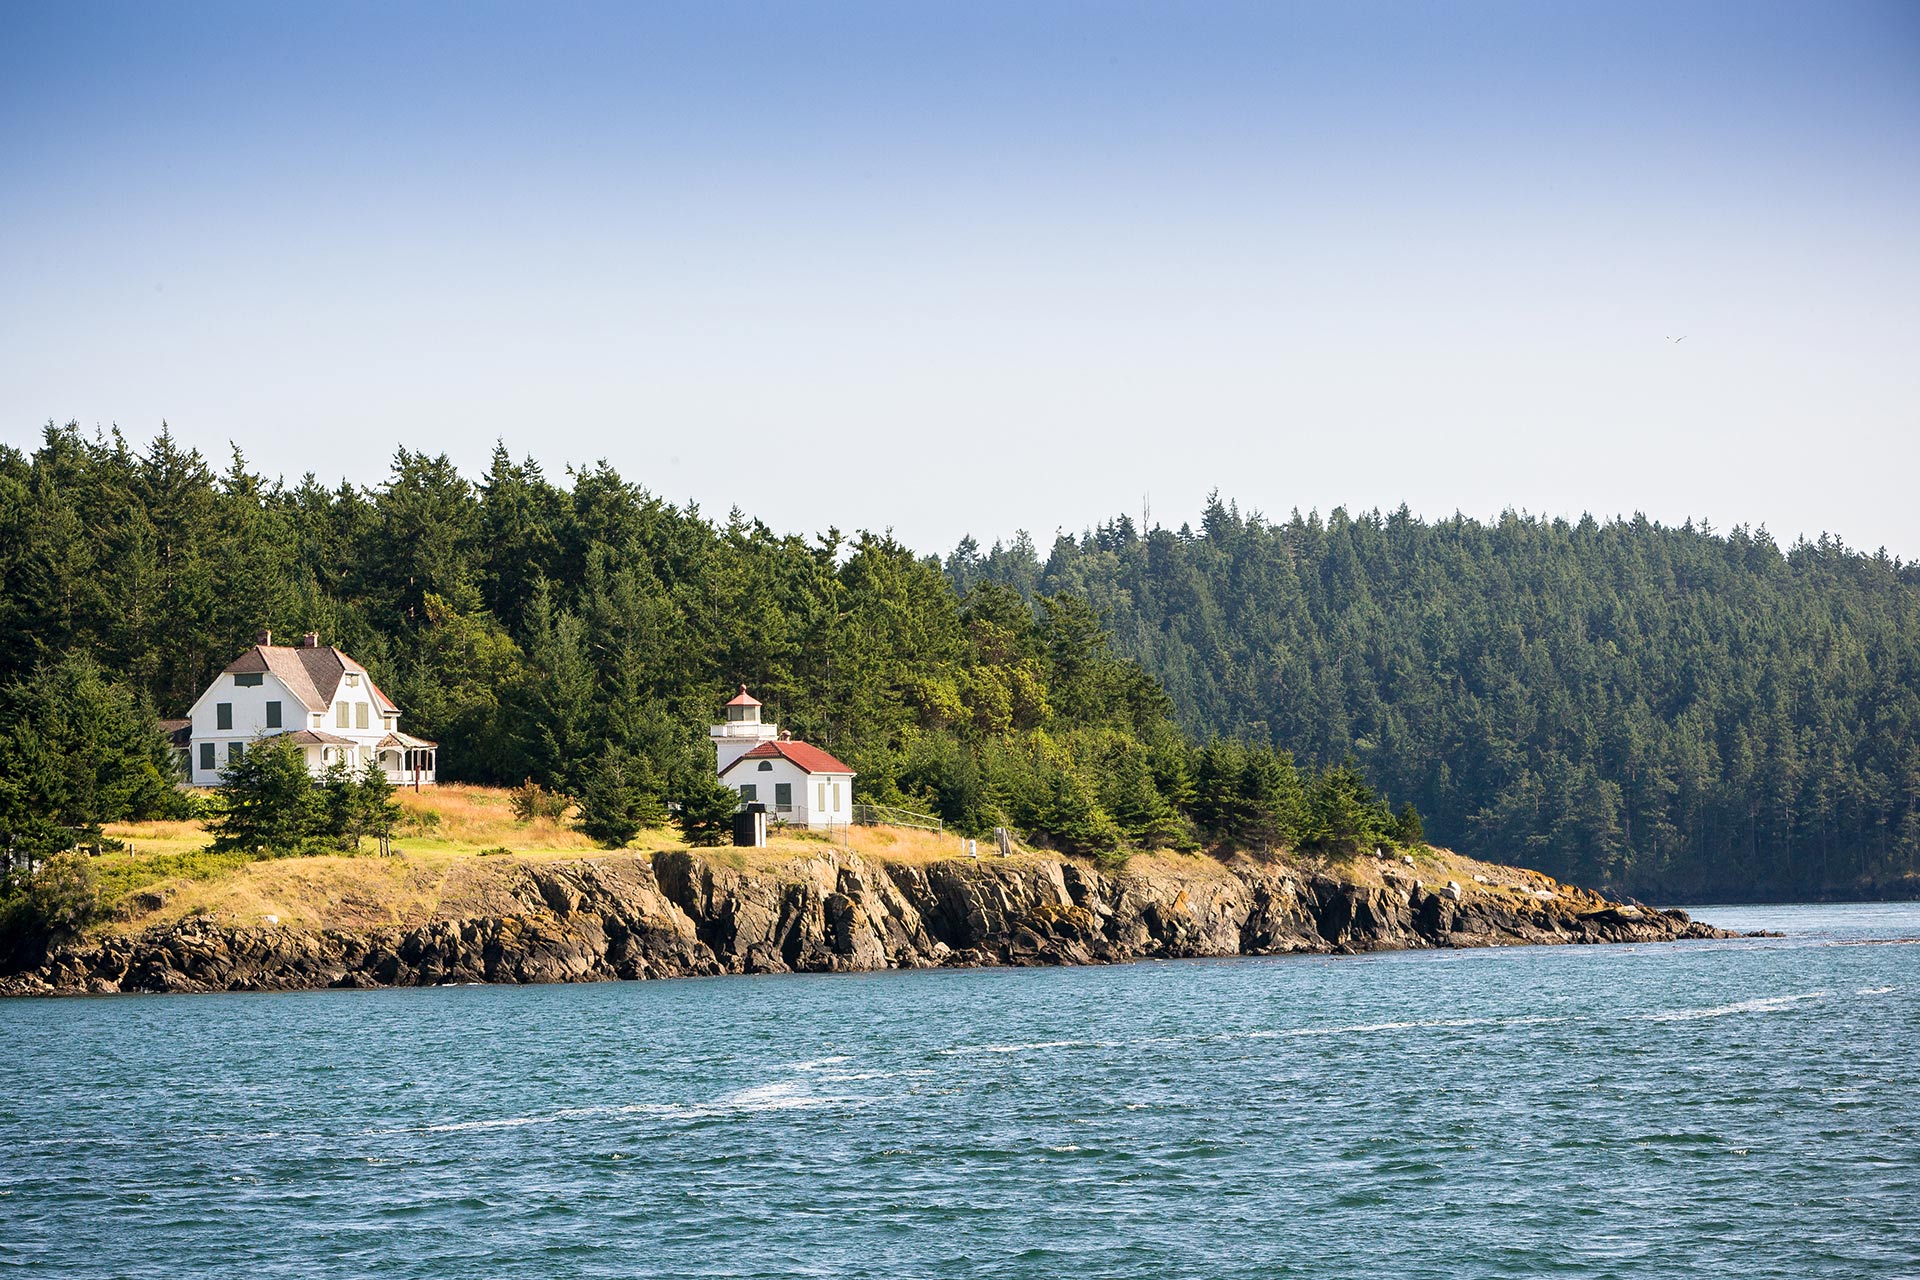 Lighthouse seen during an Orca Whales Tour from Anacortes to San Juan Islands, Washington.